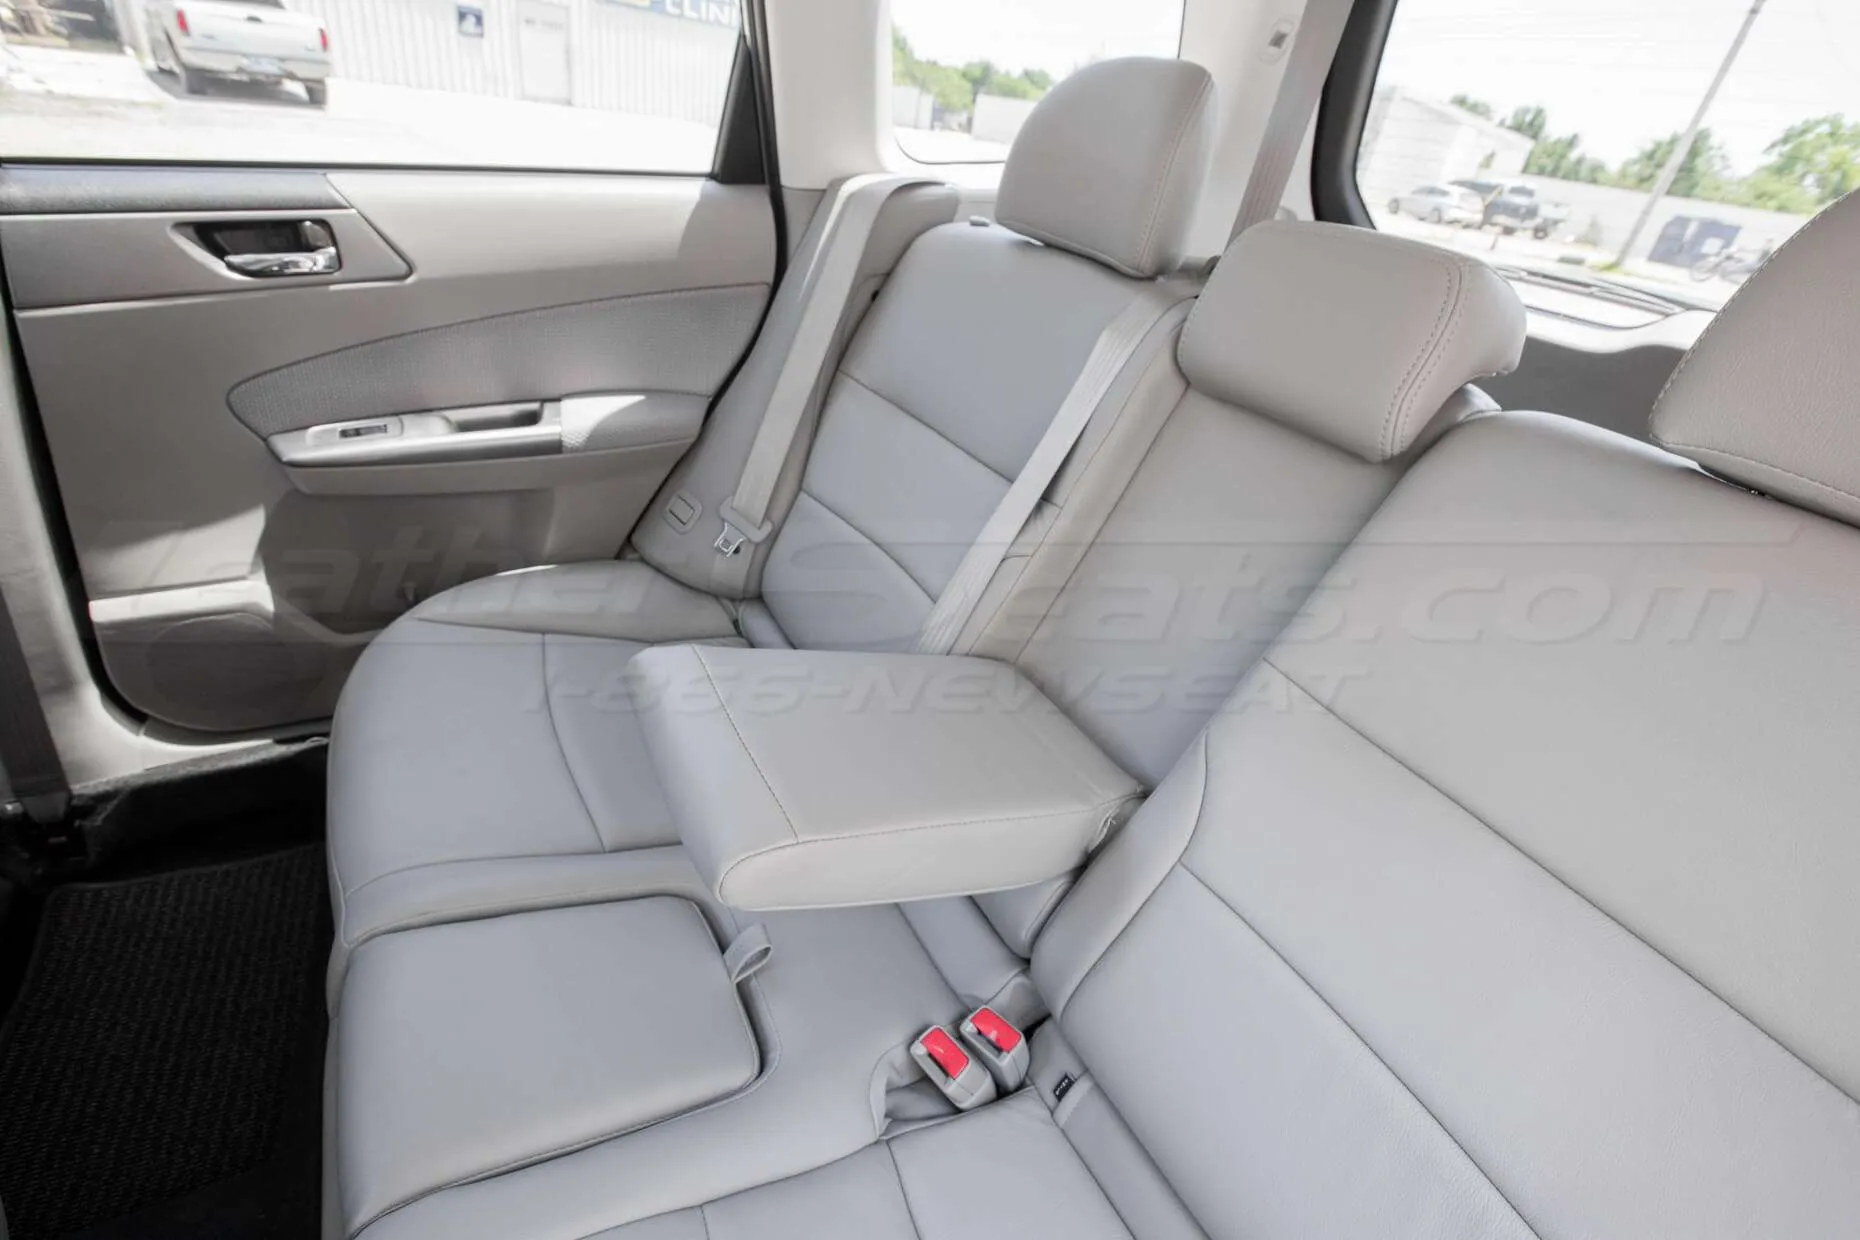 2011-2013 Subaru Forester Leather Seats - Ash - Installed - Rear seats with armrest down